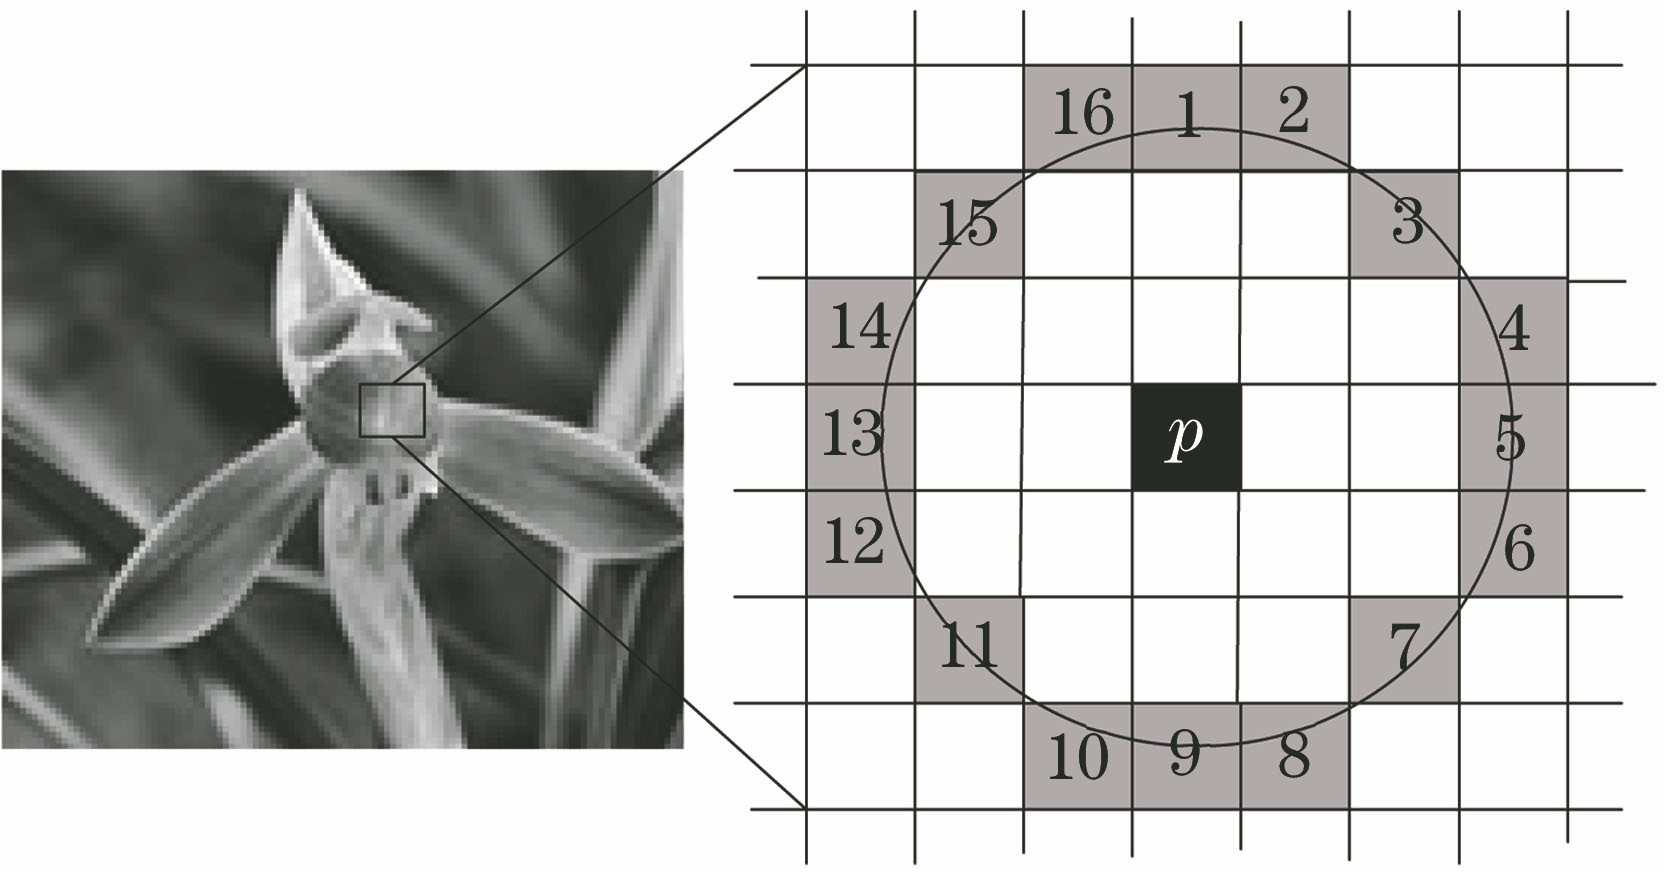 Matching effects of ORB algorithm under different illuminations and scales. (a)(b) Input images under different illuminations; (c) matching effect under illumination changes; (d)(e) input images under different scales; (f) matching effect under scale changes